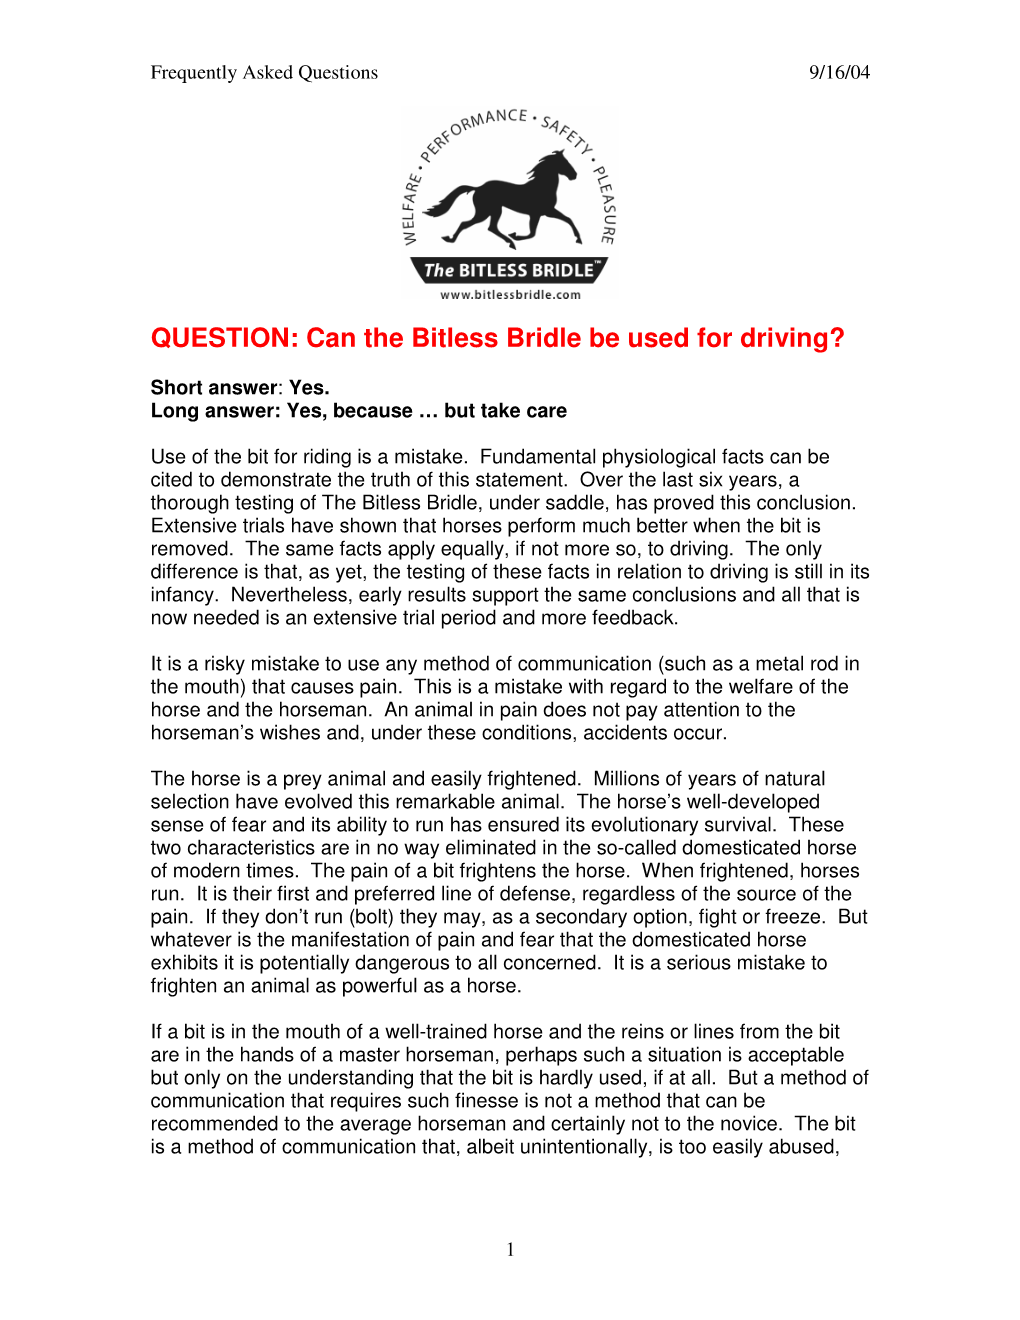 QUESTION: Can the Bitless Bridle Be Used for Driving?